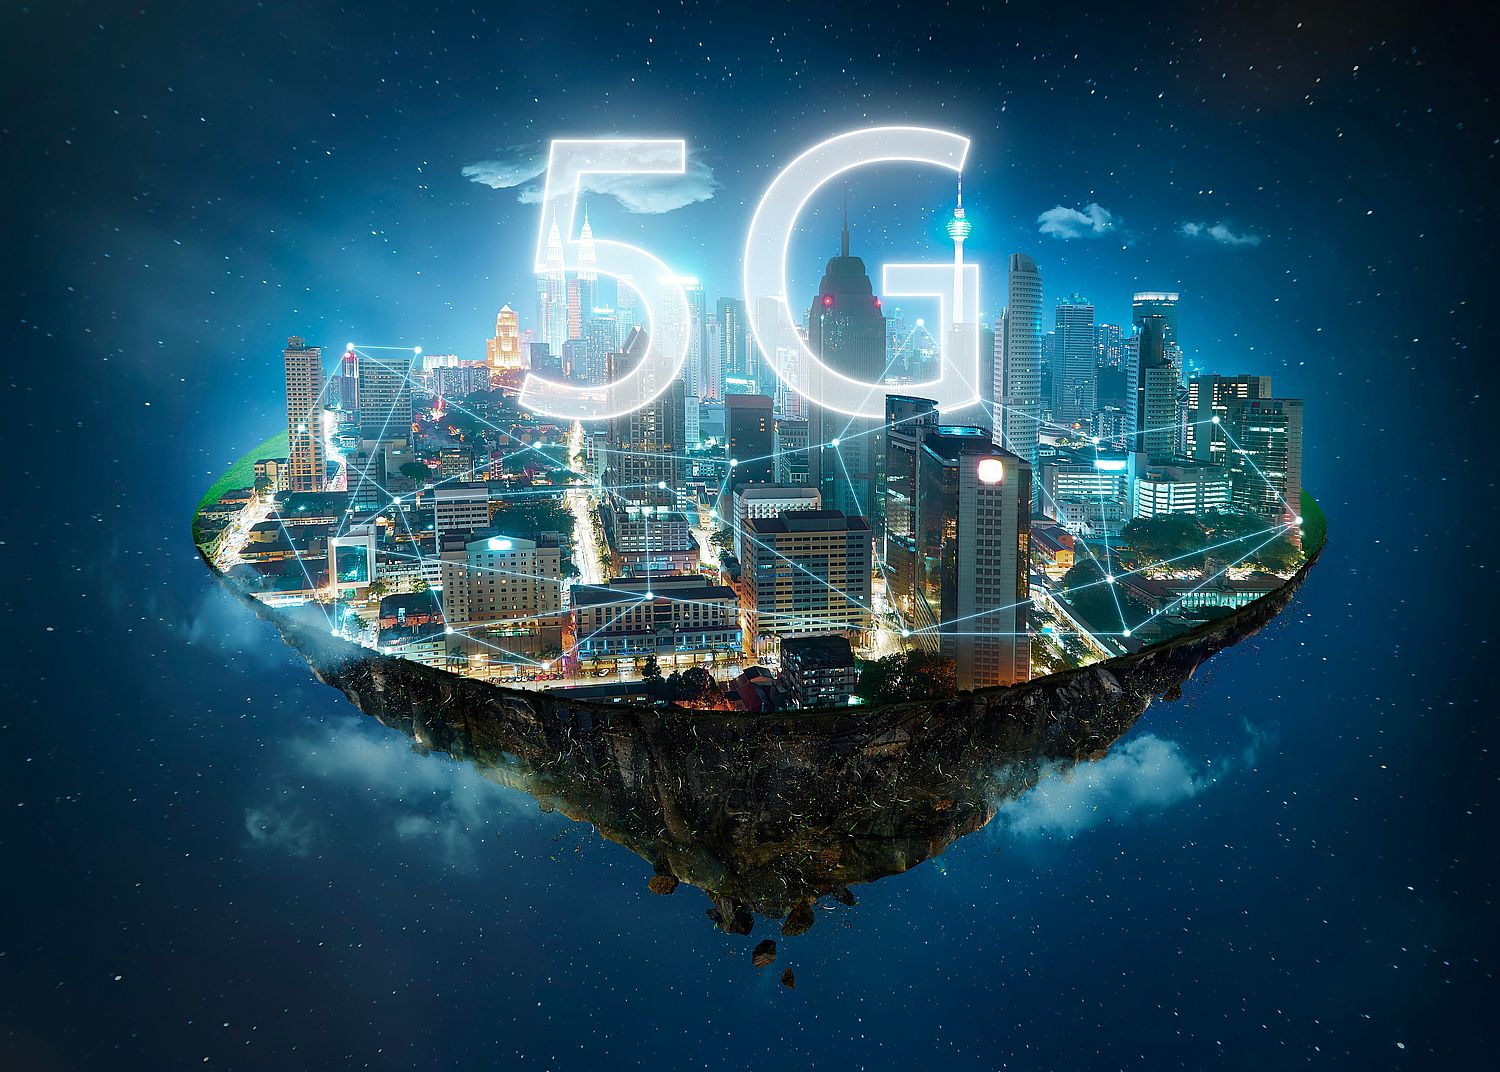 Fantasy island floating in the air with 5G network wireless systems and internet of things , Smart city and communication network concept .